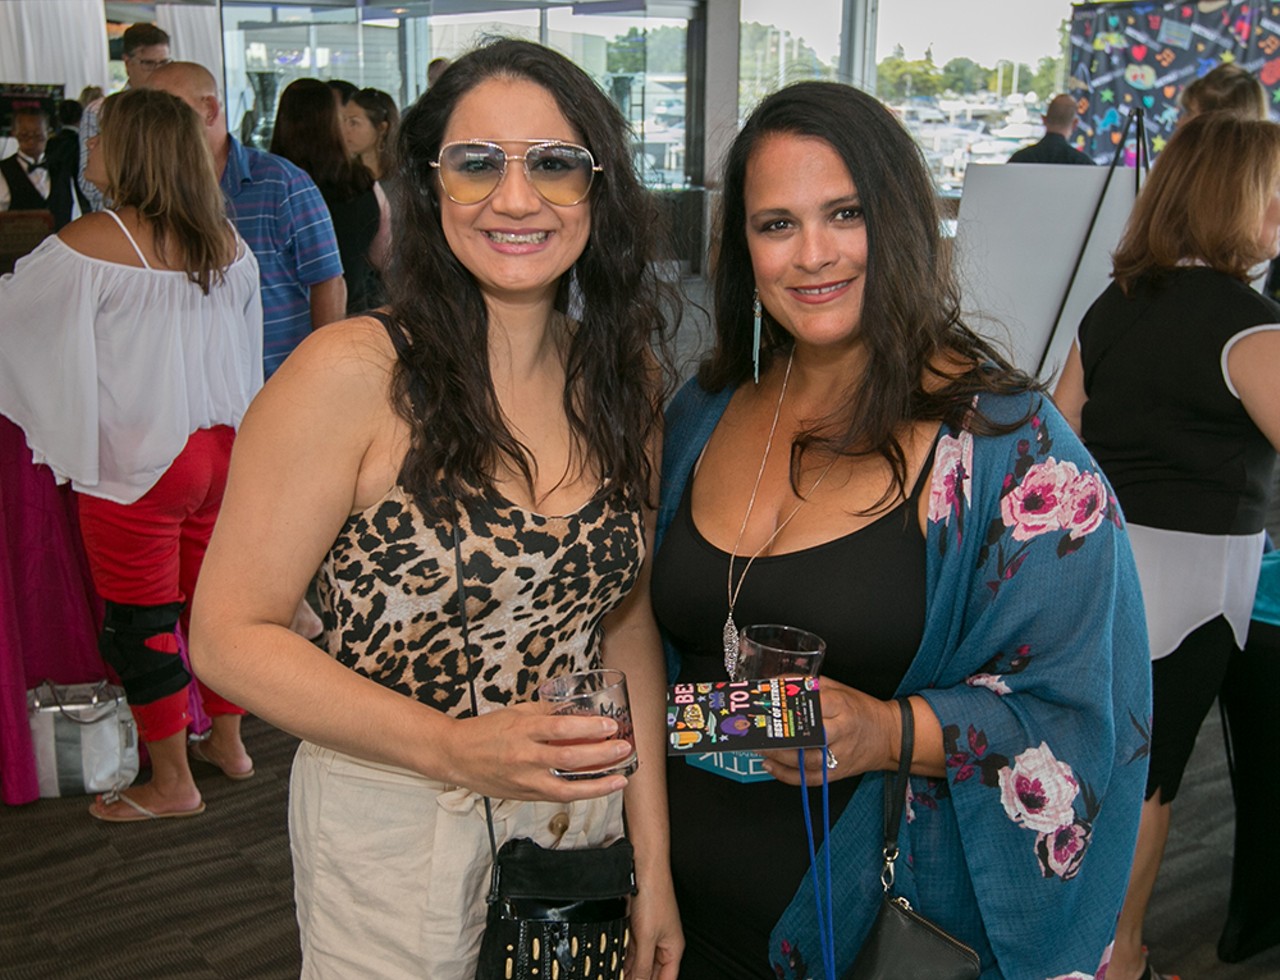 Everything we saw at Metro Times' Best of Detroit Party 2019